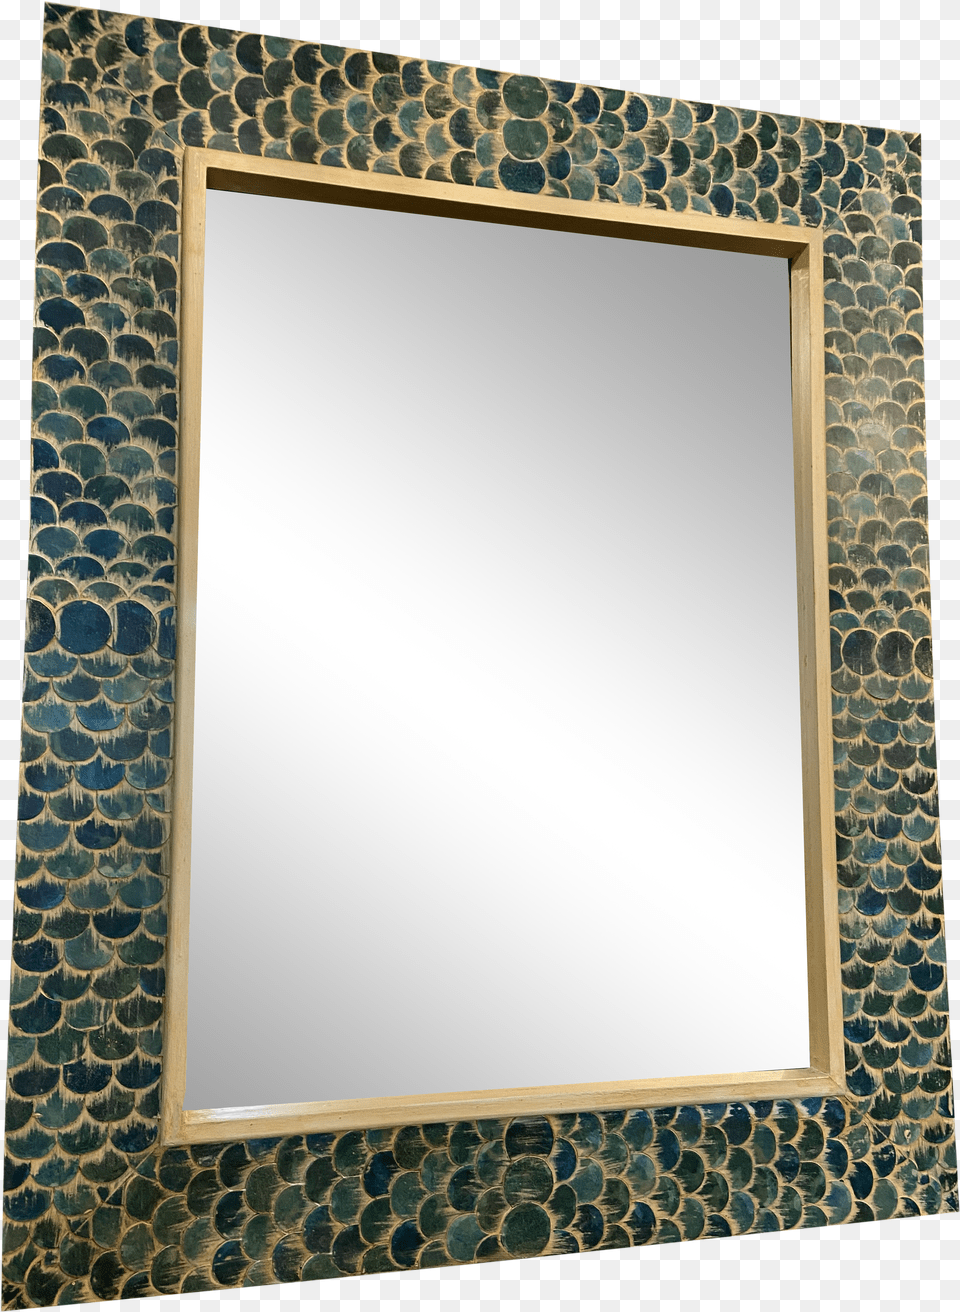 Fish Scale Framed Mirror Horizontal Free Transparent Png